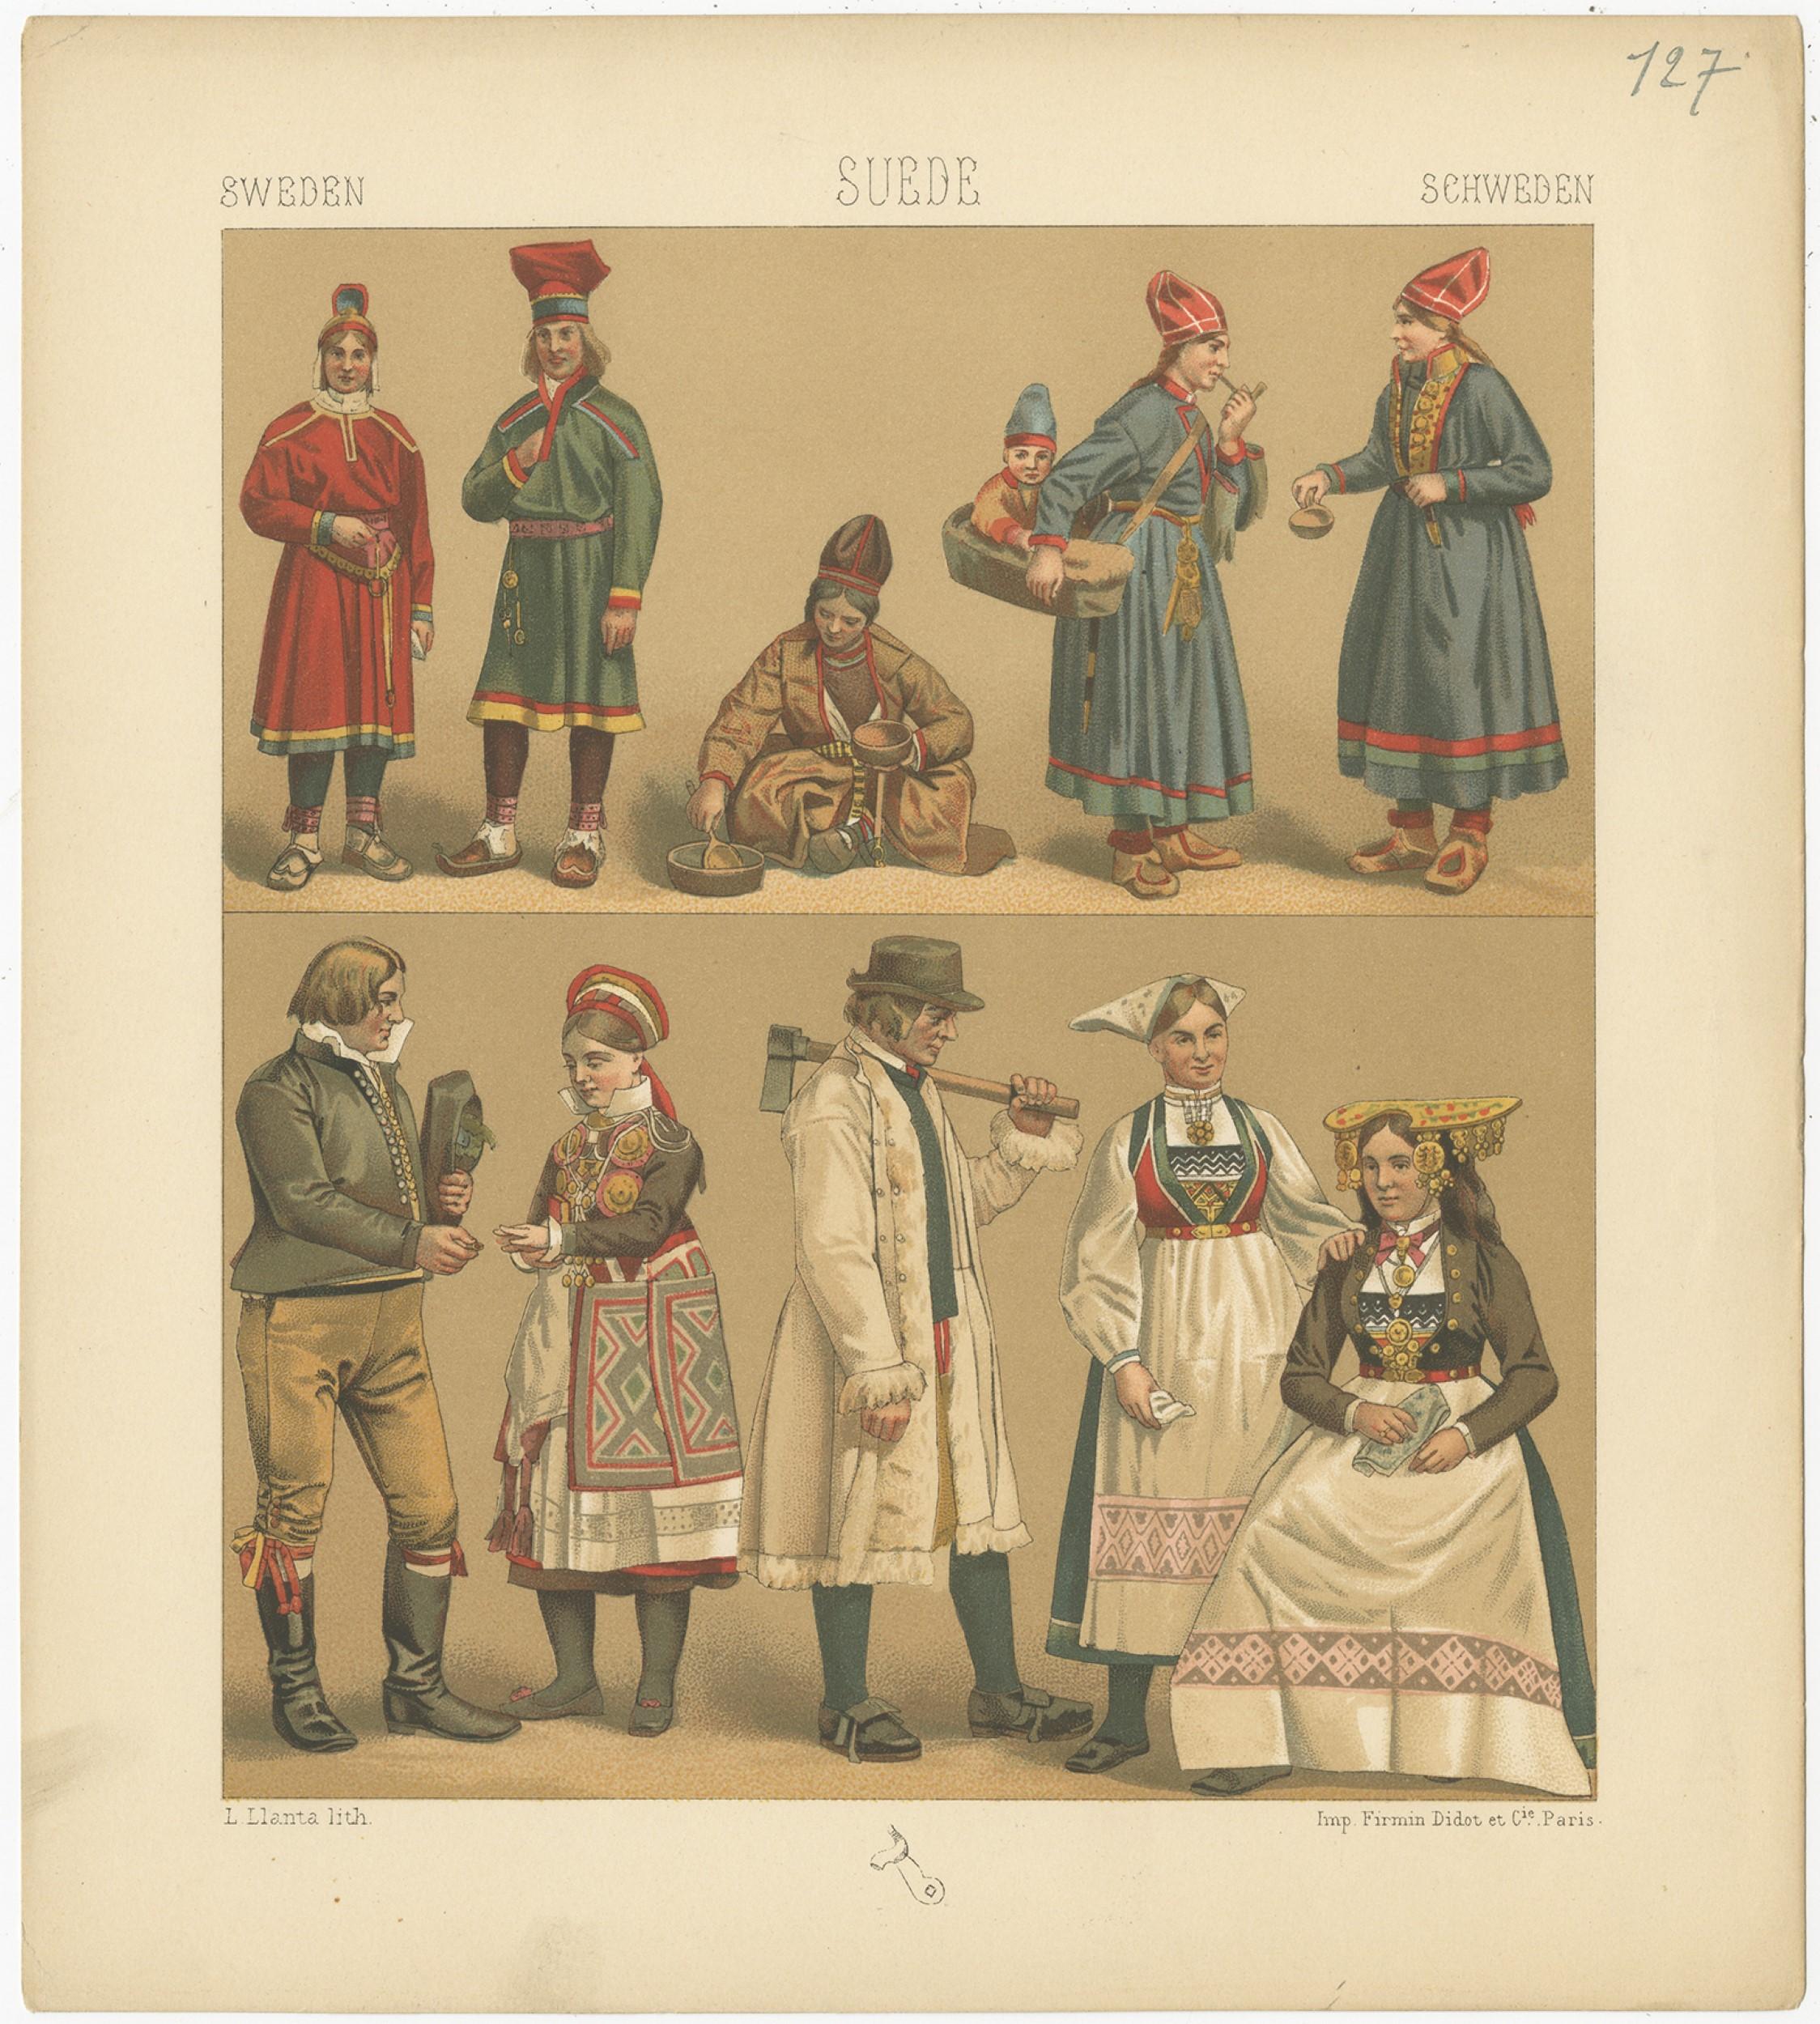 Antique print titled 'Sweden - Suede - Schweden'. Chromolithograph of Swedish Costumes. This print originates from 'Le Costume Historique' by M.A. Racinet. Published, circa 1880.